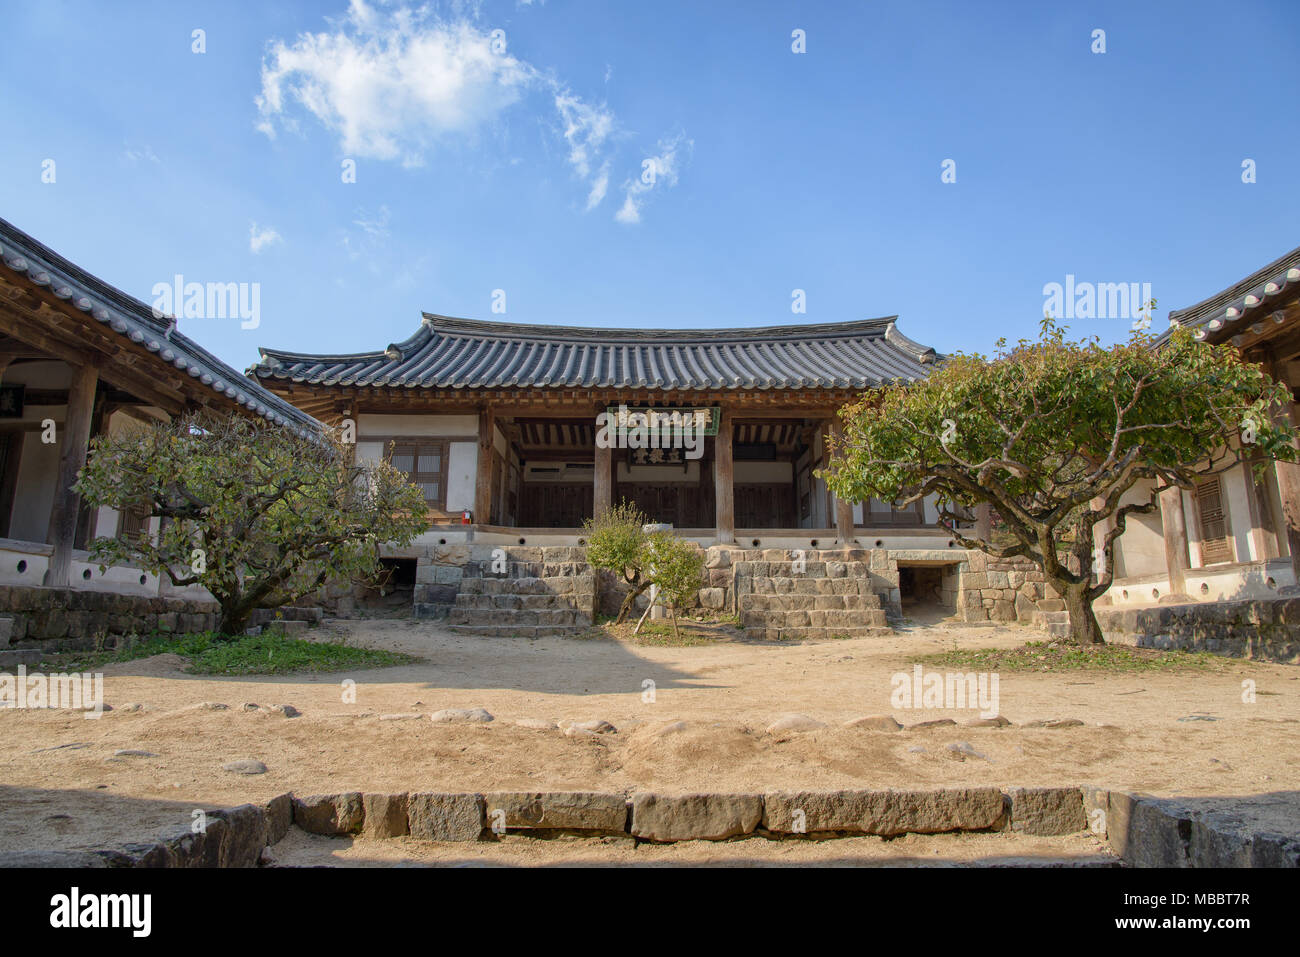 Andong, Korea - October 16, 2014: Inner view of Byeongsanseowon. Byeongsanseowon is the lacal academy during the Joseon dynasty located in Andoong, Ko Stock Photo